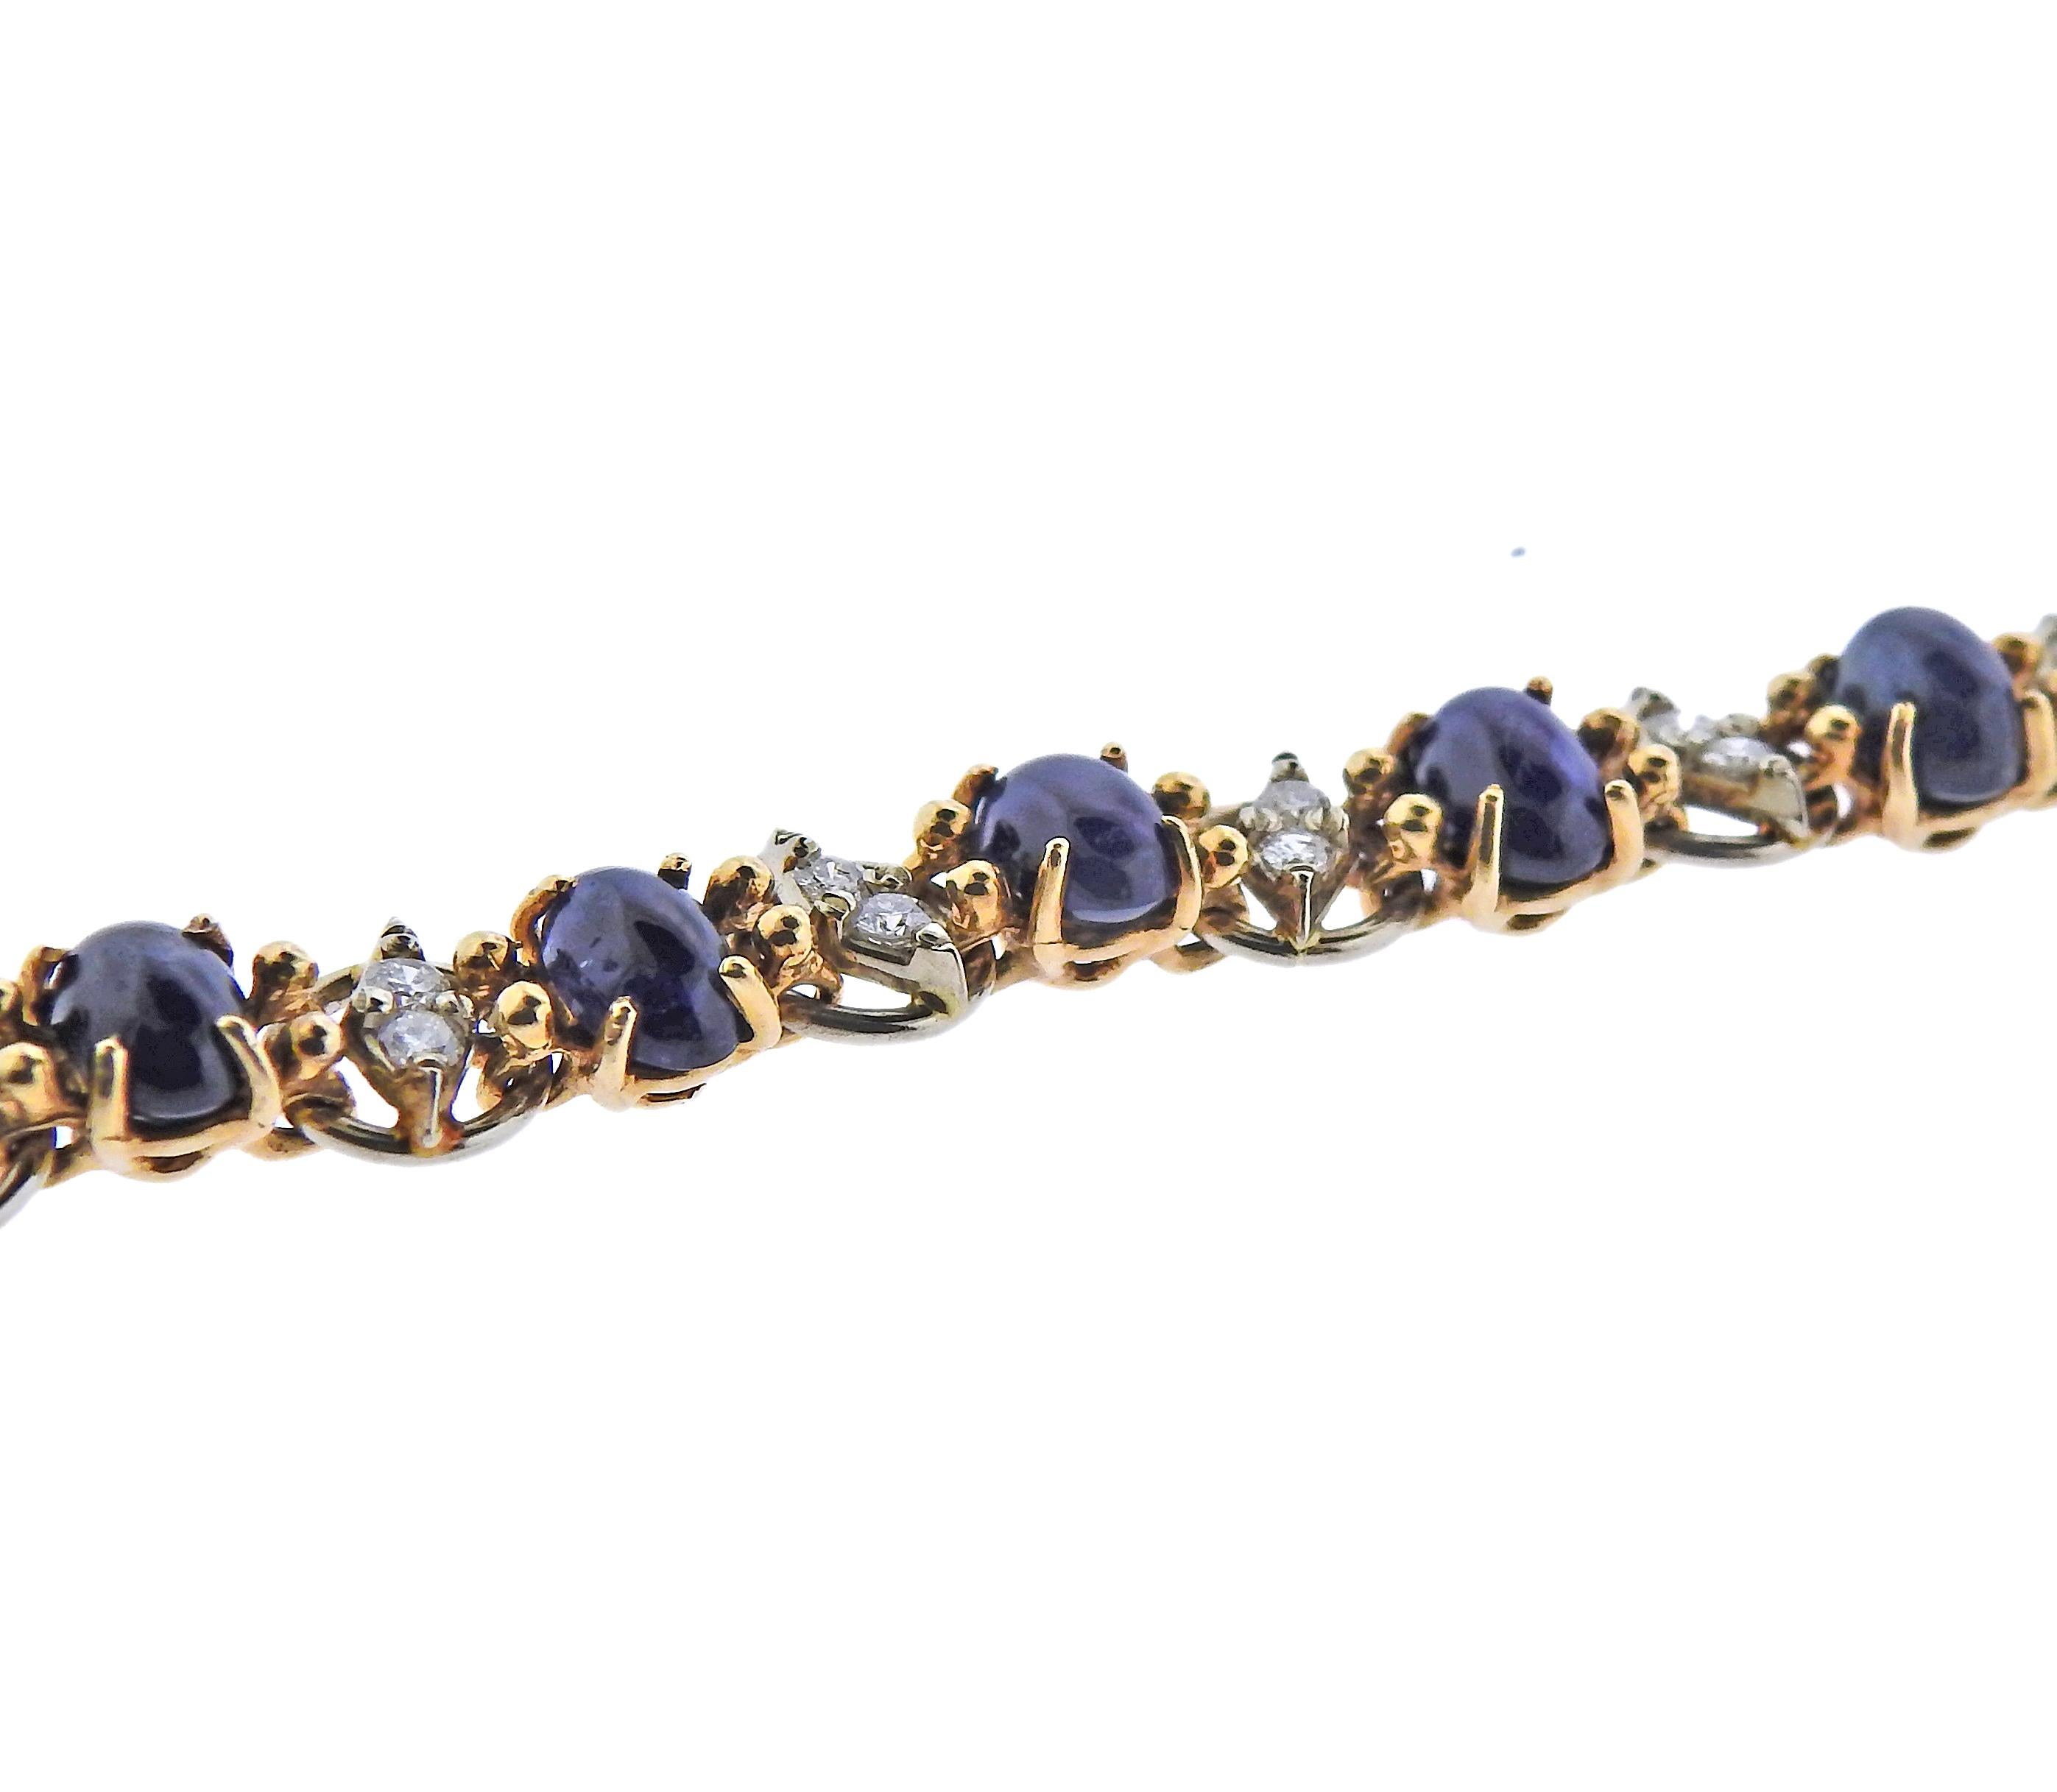 14k gold bracelet, set with blue sapphire cabochons and approx. 0.60ctw in diamonds. Bracelet is 7